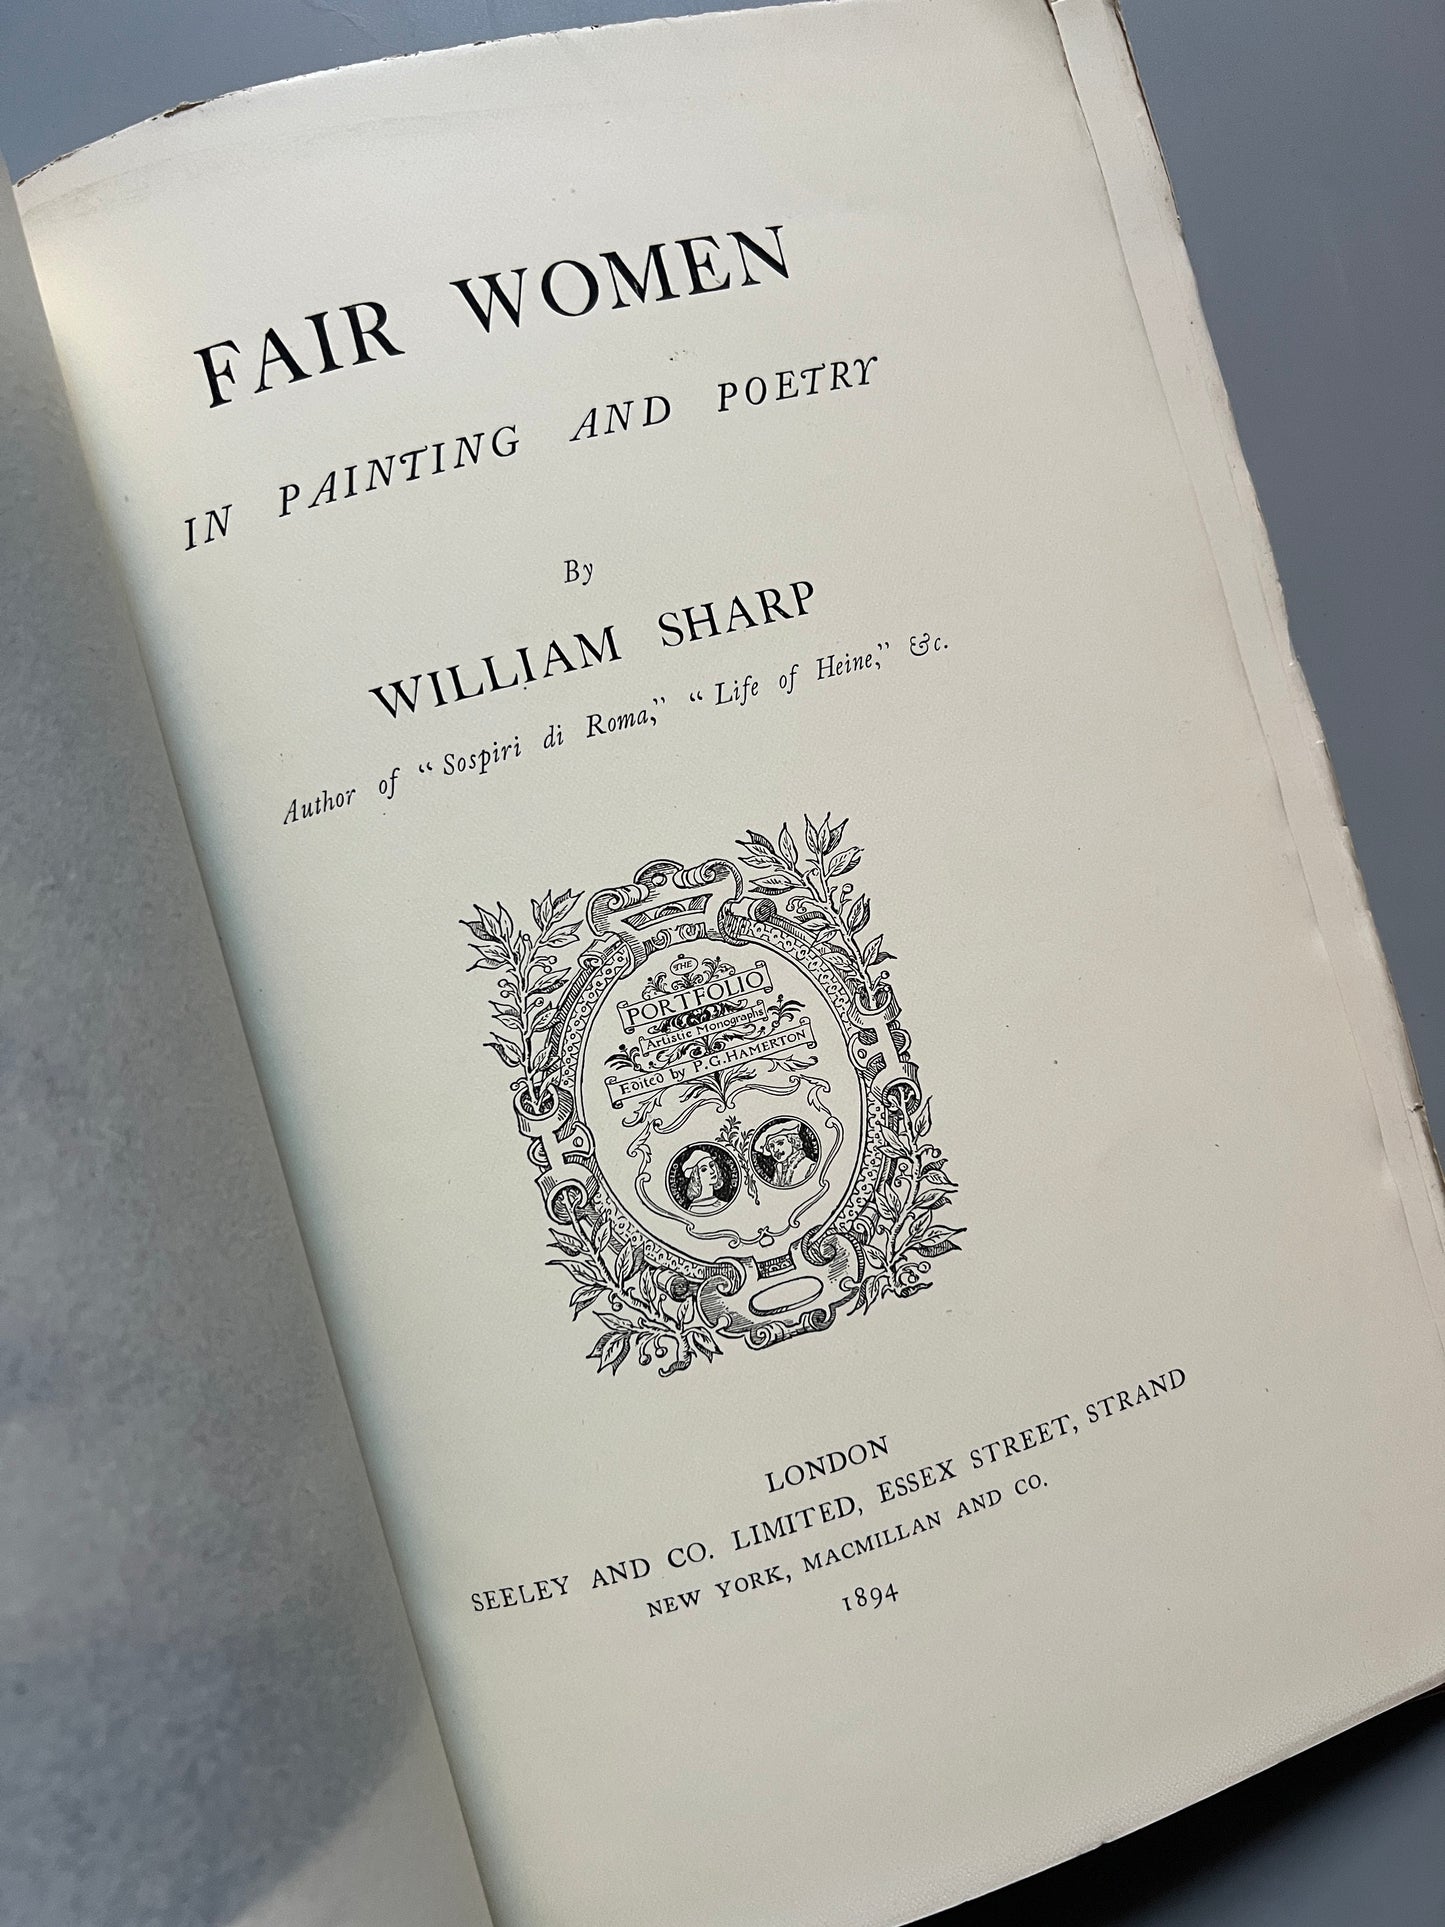 Fair women in painting and poetry, William Sharp. The portfolio - Seeley and Co, 1894